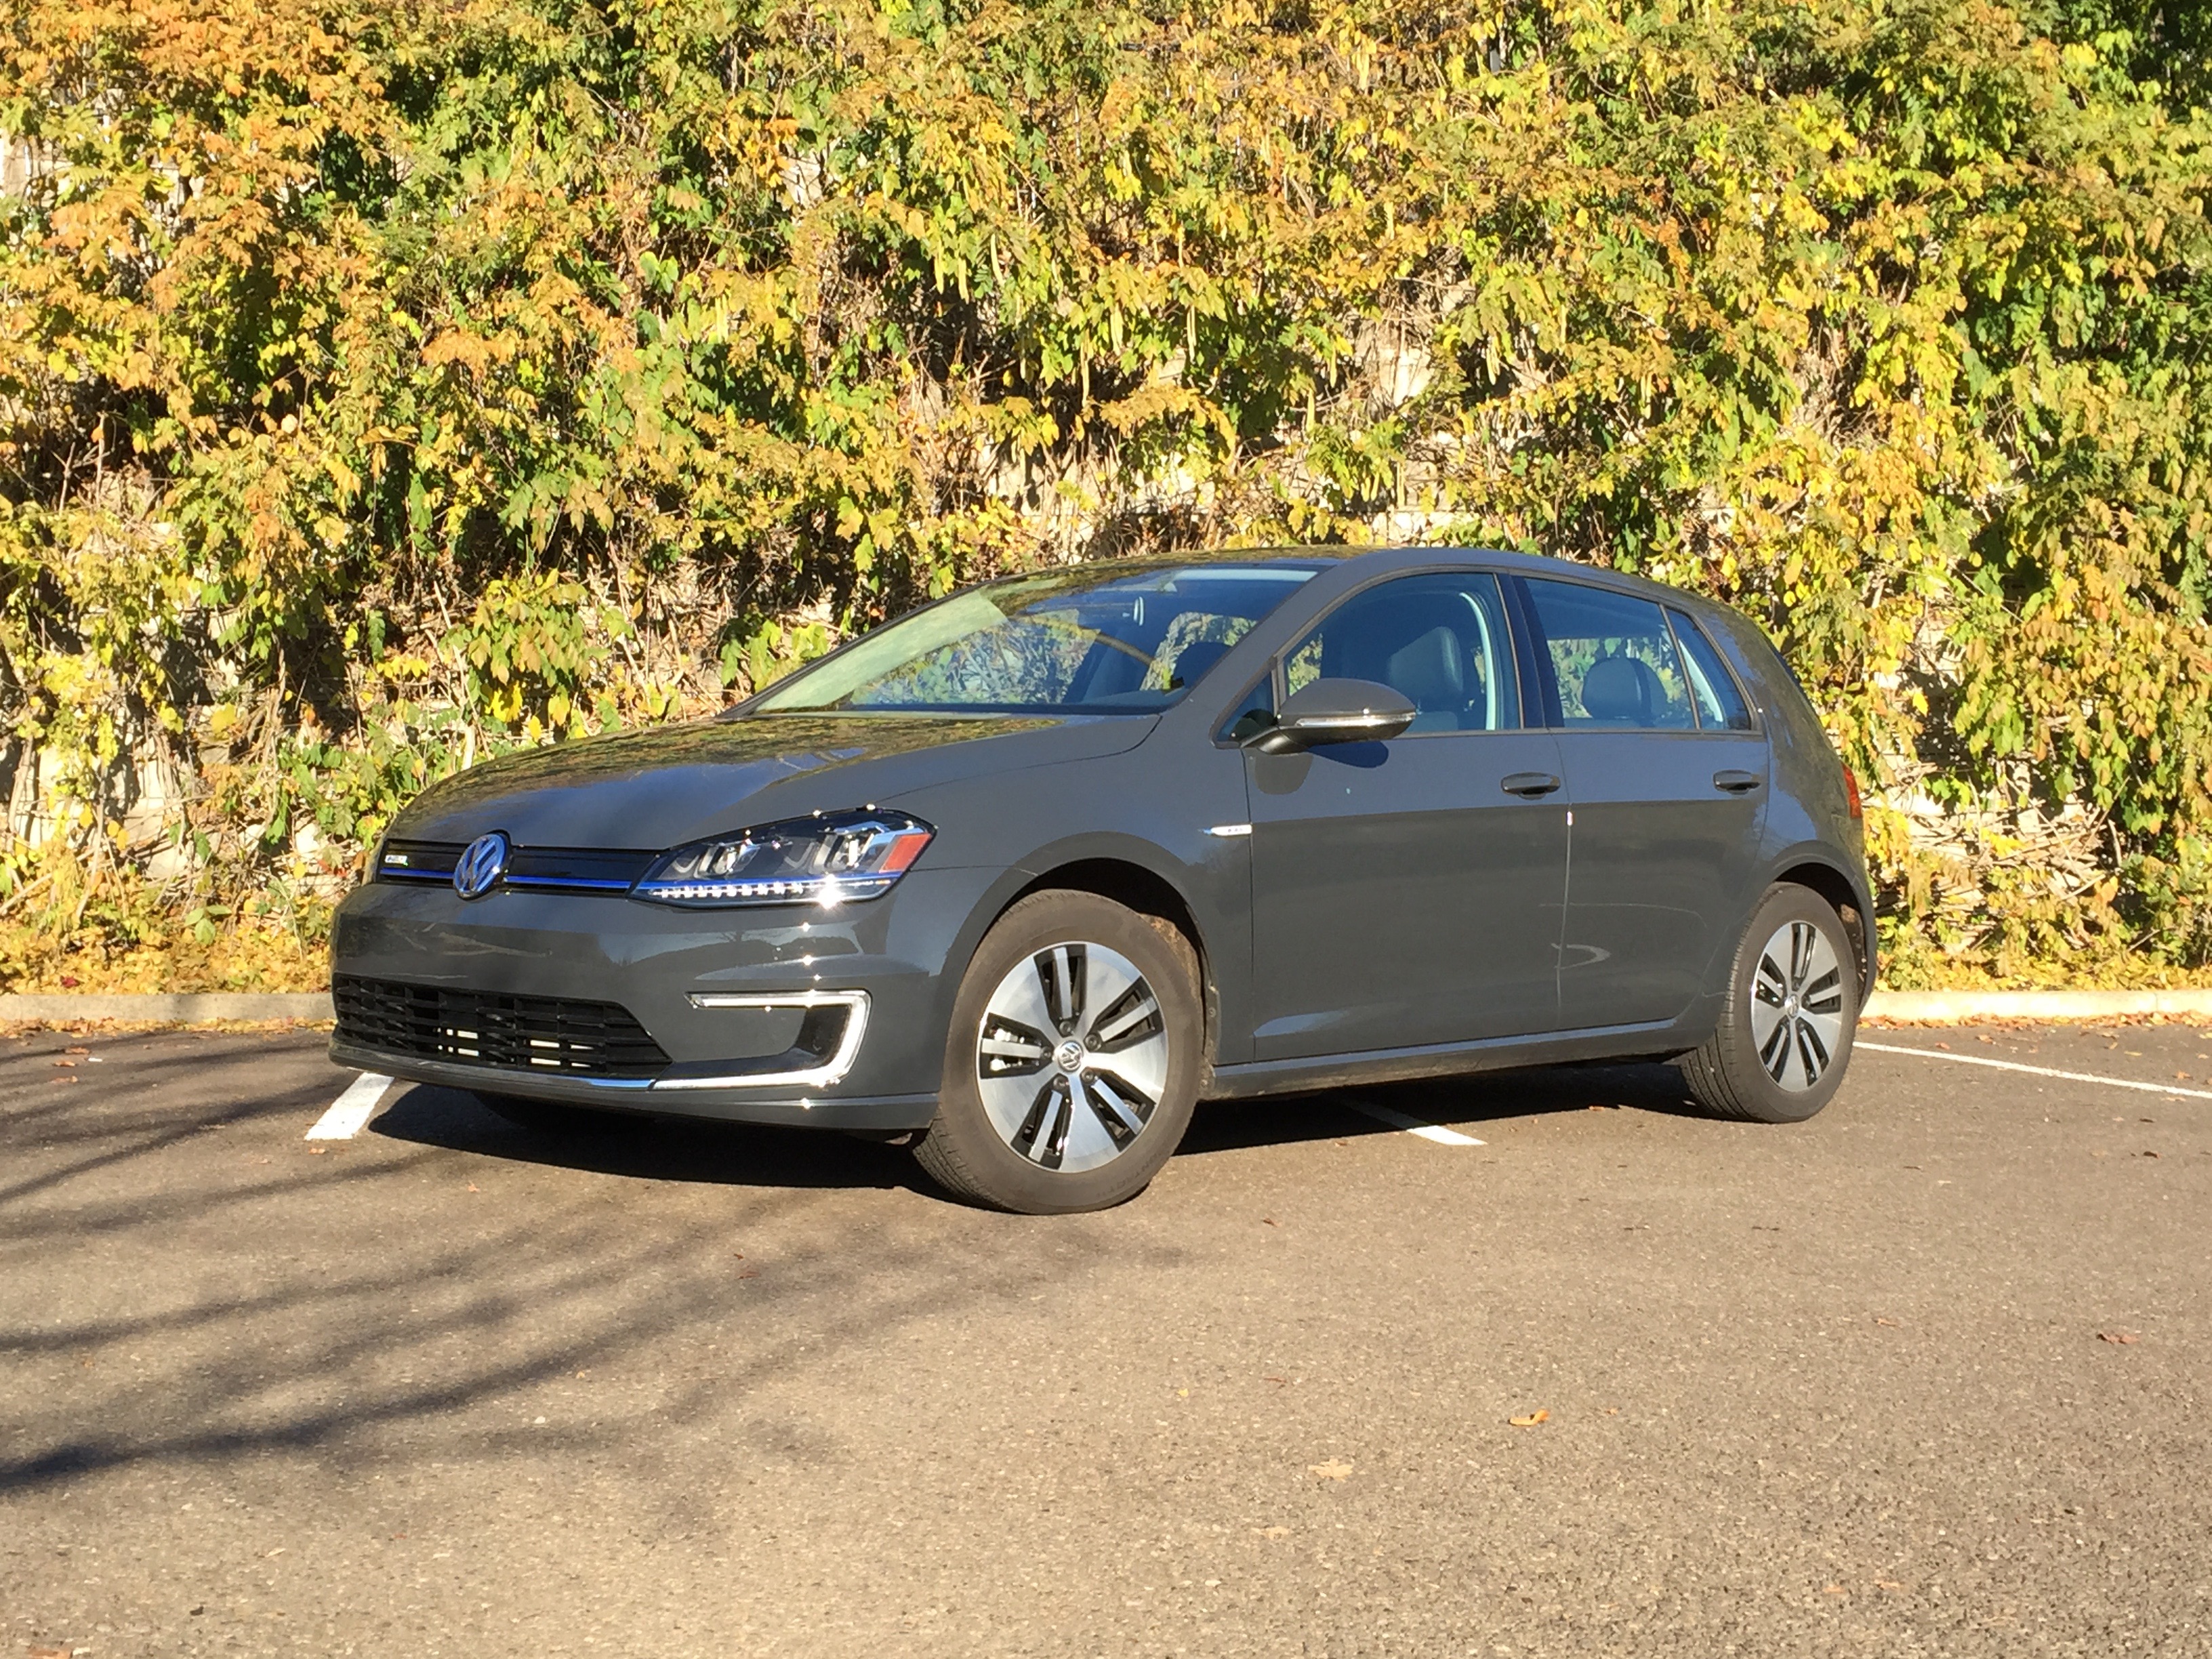 Vw E Golf Staying Connected With Car Net Services Smartphone App